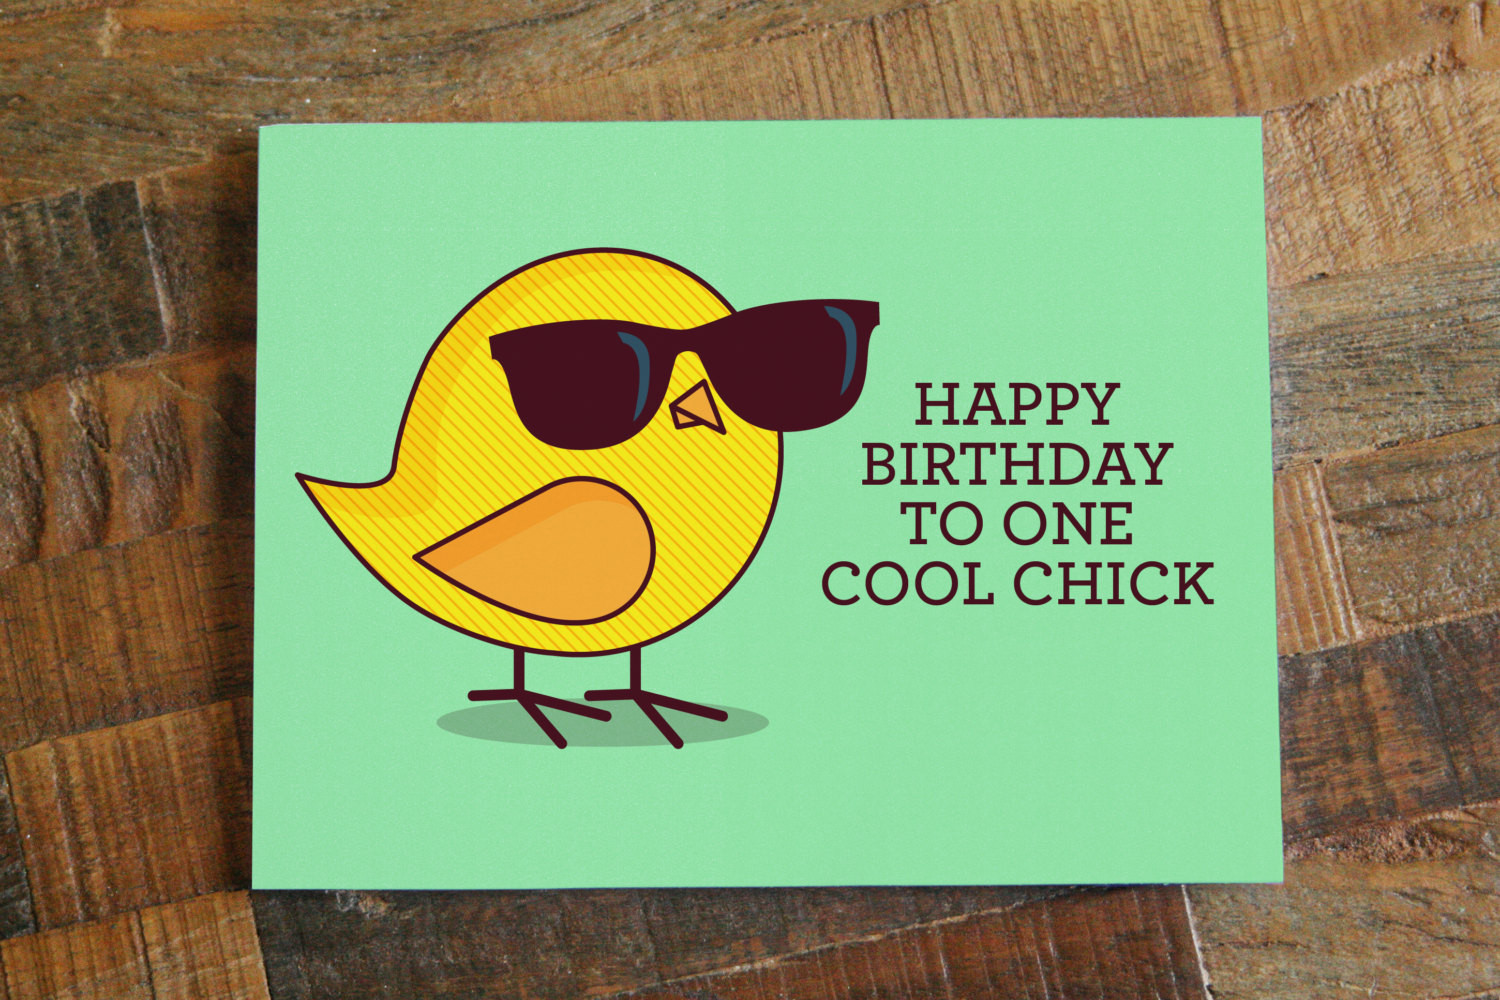 Happy Birthday Card Funny
 Funny Birthday Card For Her "Happy Birthday to e Cool